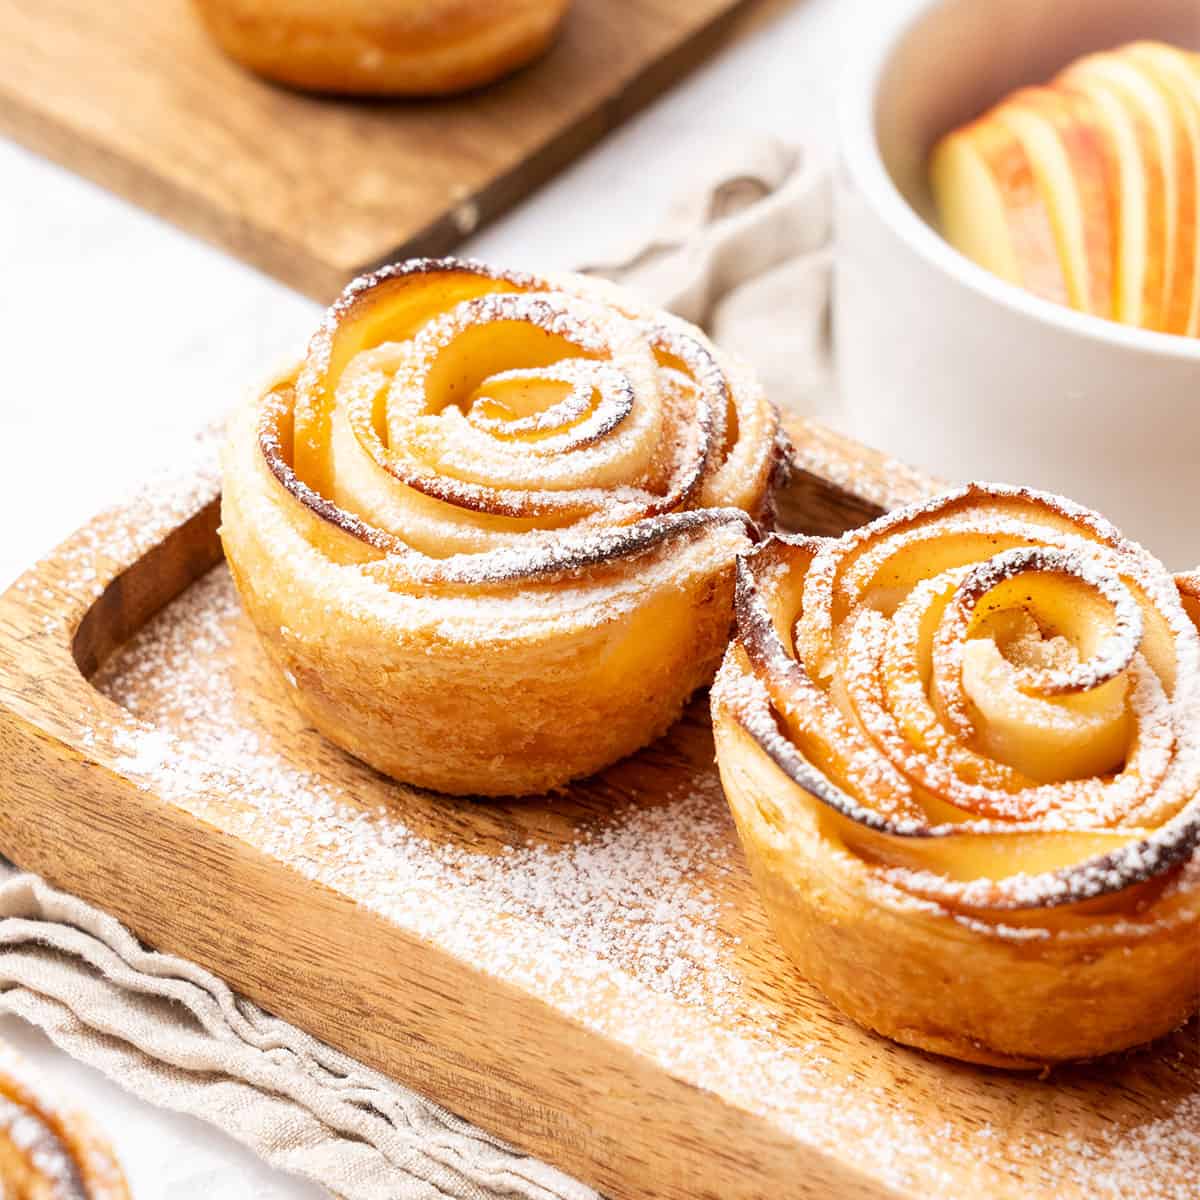 <p>If you have been looking for an elegant treat to add to your dessert table, these easy <a href="https://www.spatuladesserts.com/apple-roses-with-puff-pastry/"><strong>apple roses with puff pastry</strong> </a>are just what you have been looking for! Made with fresh apples, cinnamon, sugar, and a light and flaky puff pastry crust, this dessert isn’t just eye-catching but mouthwateringly delicious. Serve them for Valentine’s Day, Mother’s Day, or any occasion you want to impress your guests!</p><p><strong>Go to the recipe: <a href="https://www.spatuladesserts.com/apple-roses-with-puff-pastry/">Apple Roses with Puff Pastry</a></strong></p>